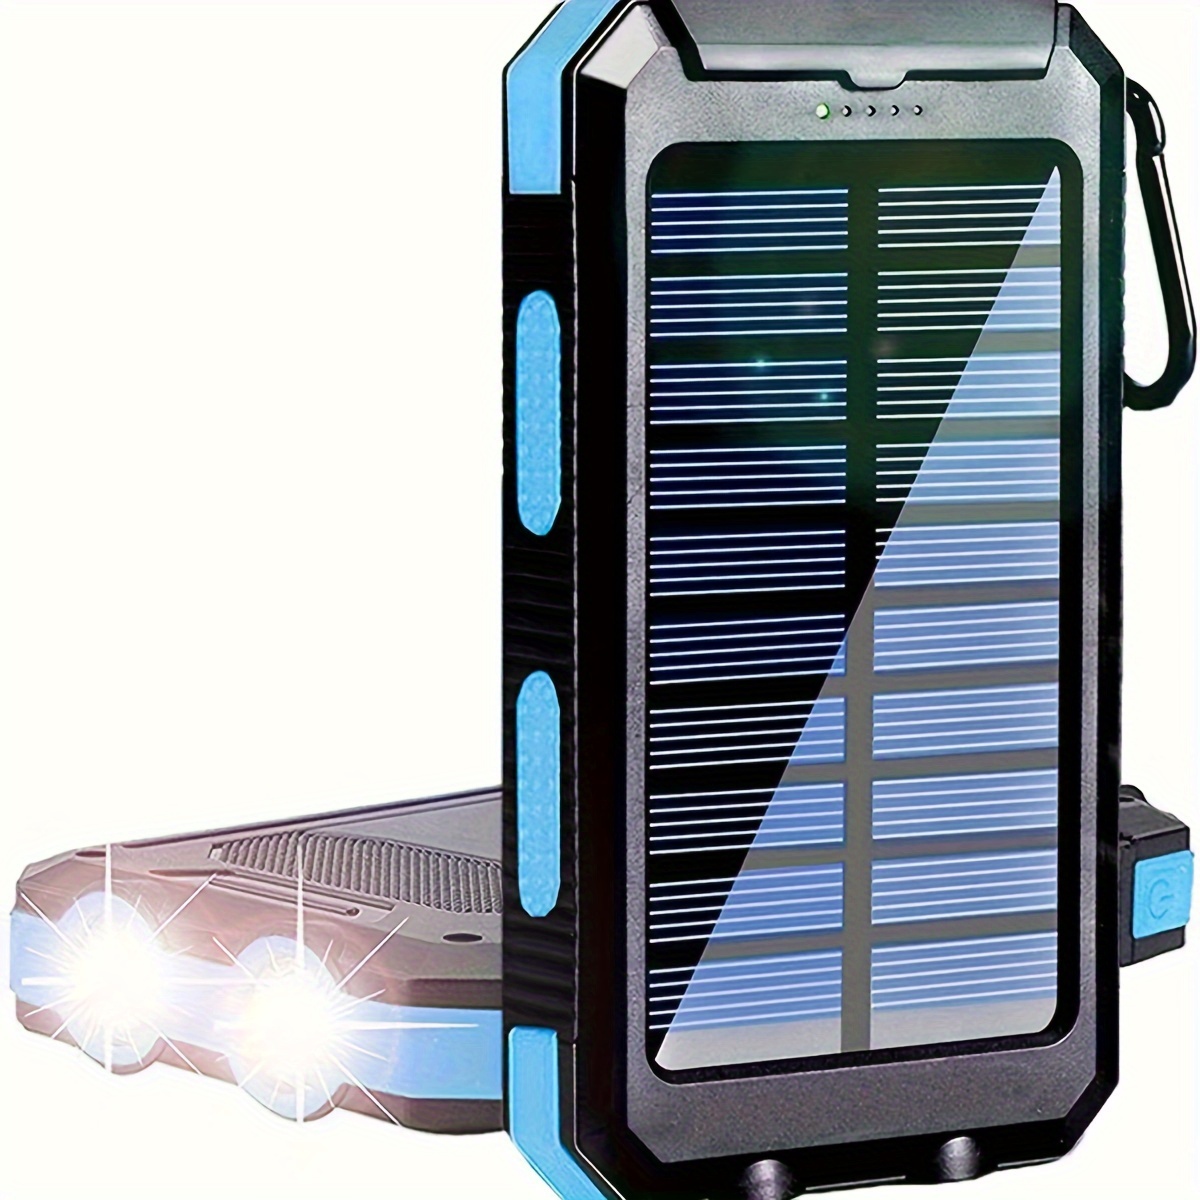 

Solar Powered Power Bank, Built-in Battery 8000mah, External Battery Pack Usb C Input/output Port, With Dual Led Flashlight, Suitable For Ios And Android